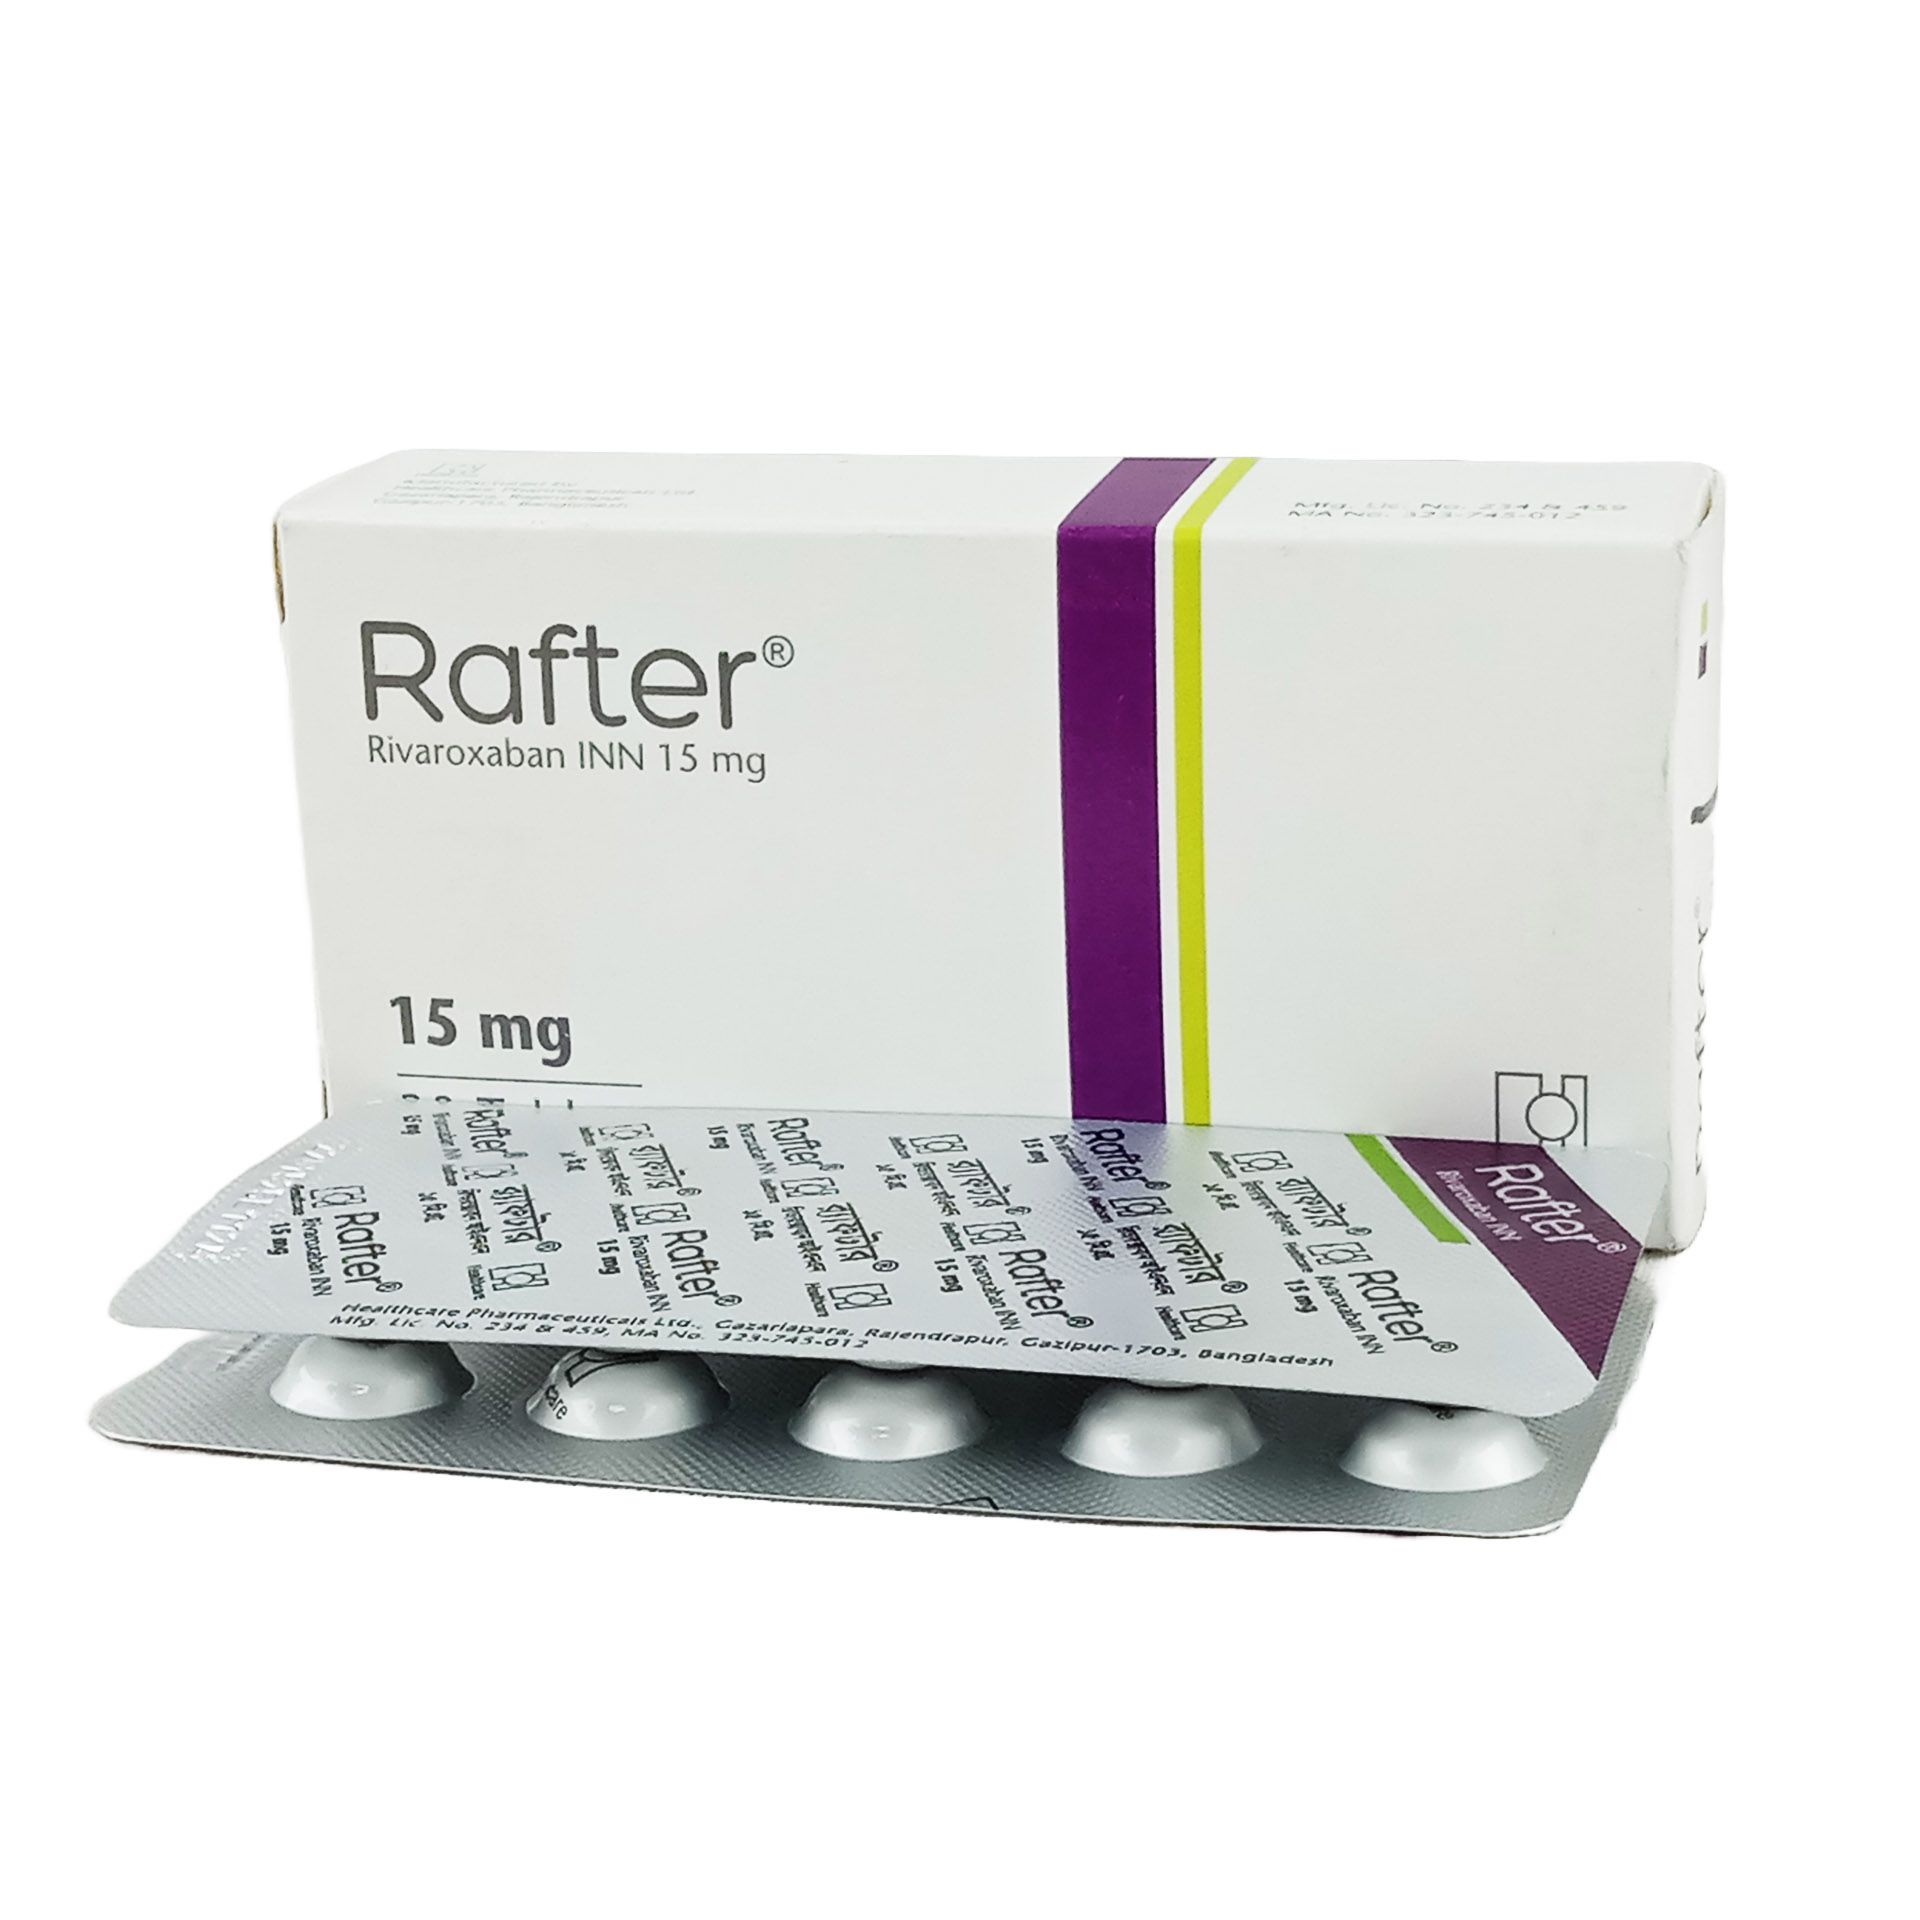 Rafter 15mg Tablet